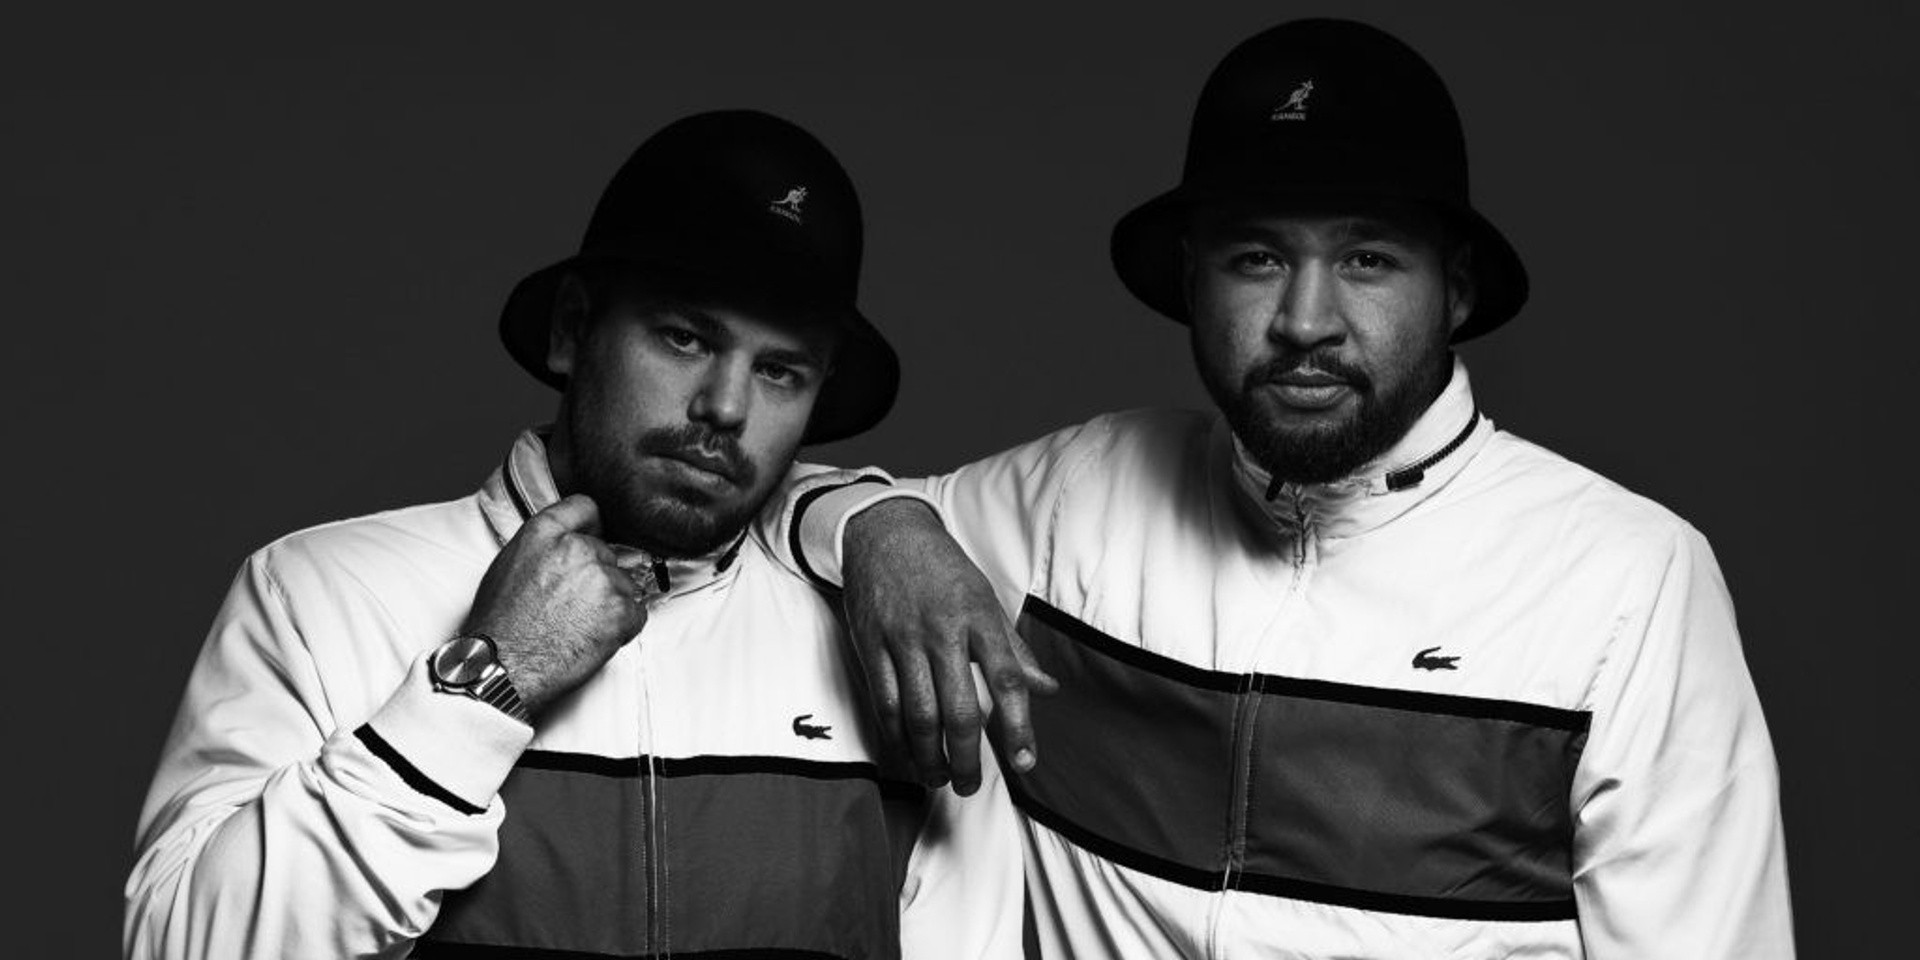 Bass-house duo Moksi on stirring up the EDM scene: "We didn't ever expect to end up on the main stage of Ultra Miami"